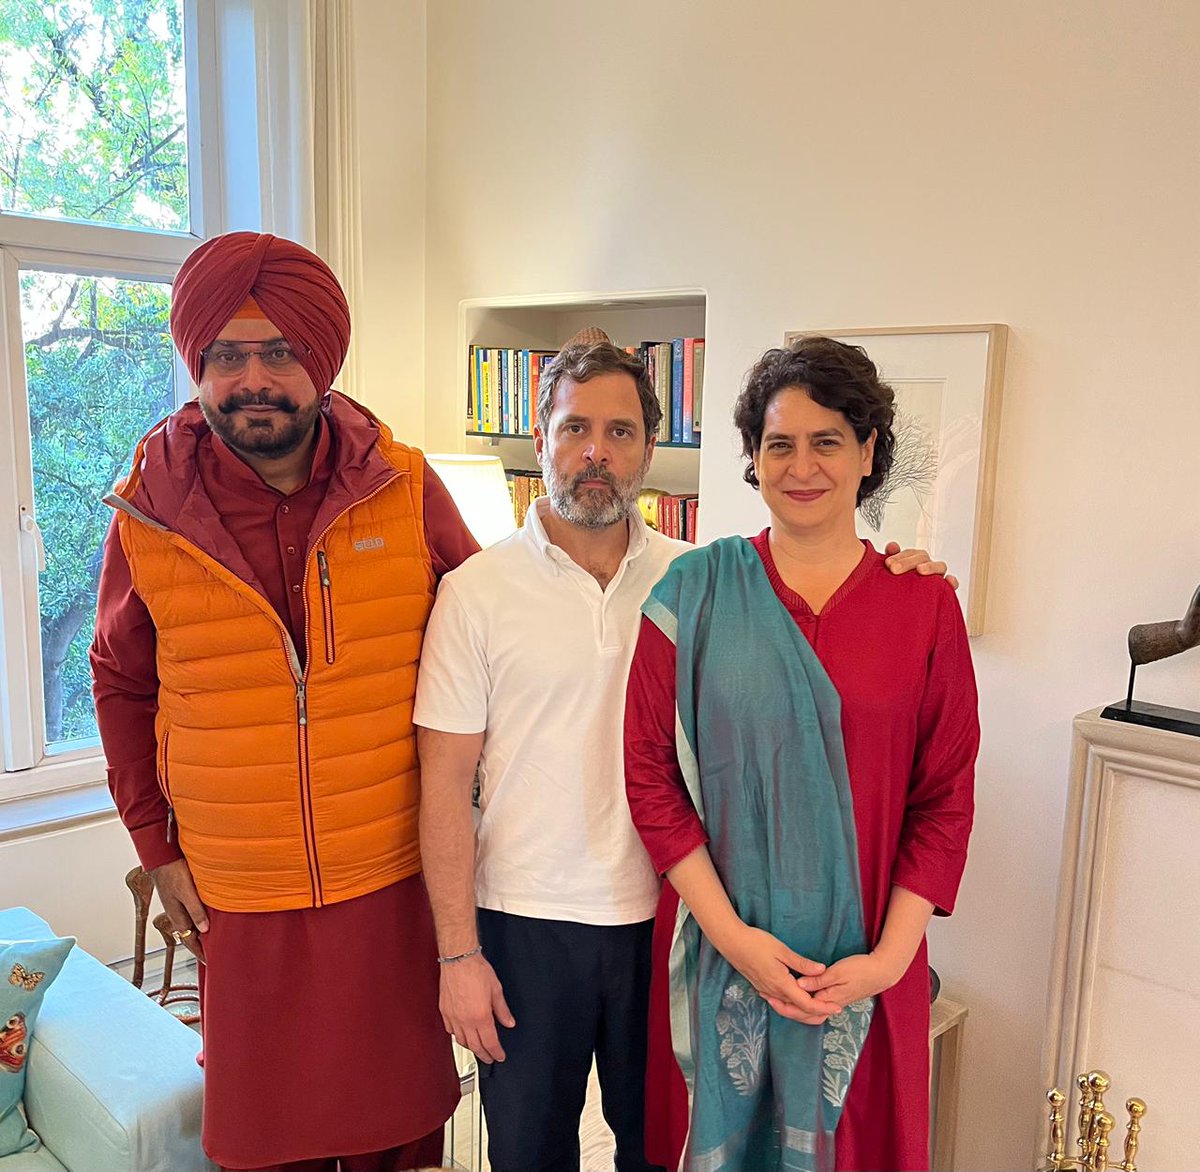 Met my Mentor Rahul ji and Friend, Philosopher, Guide Priyanka ji in New Delhi Today.

You can Jail me , Intimidate me, Block all my financial accounts but My commitment for Punjab and My Leaders will neither flinch nor back an inch !!